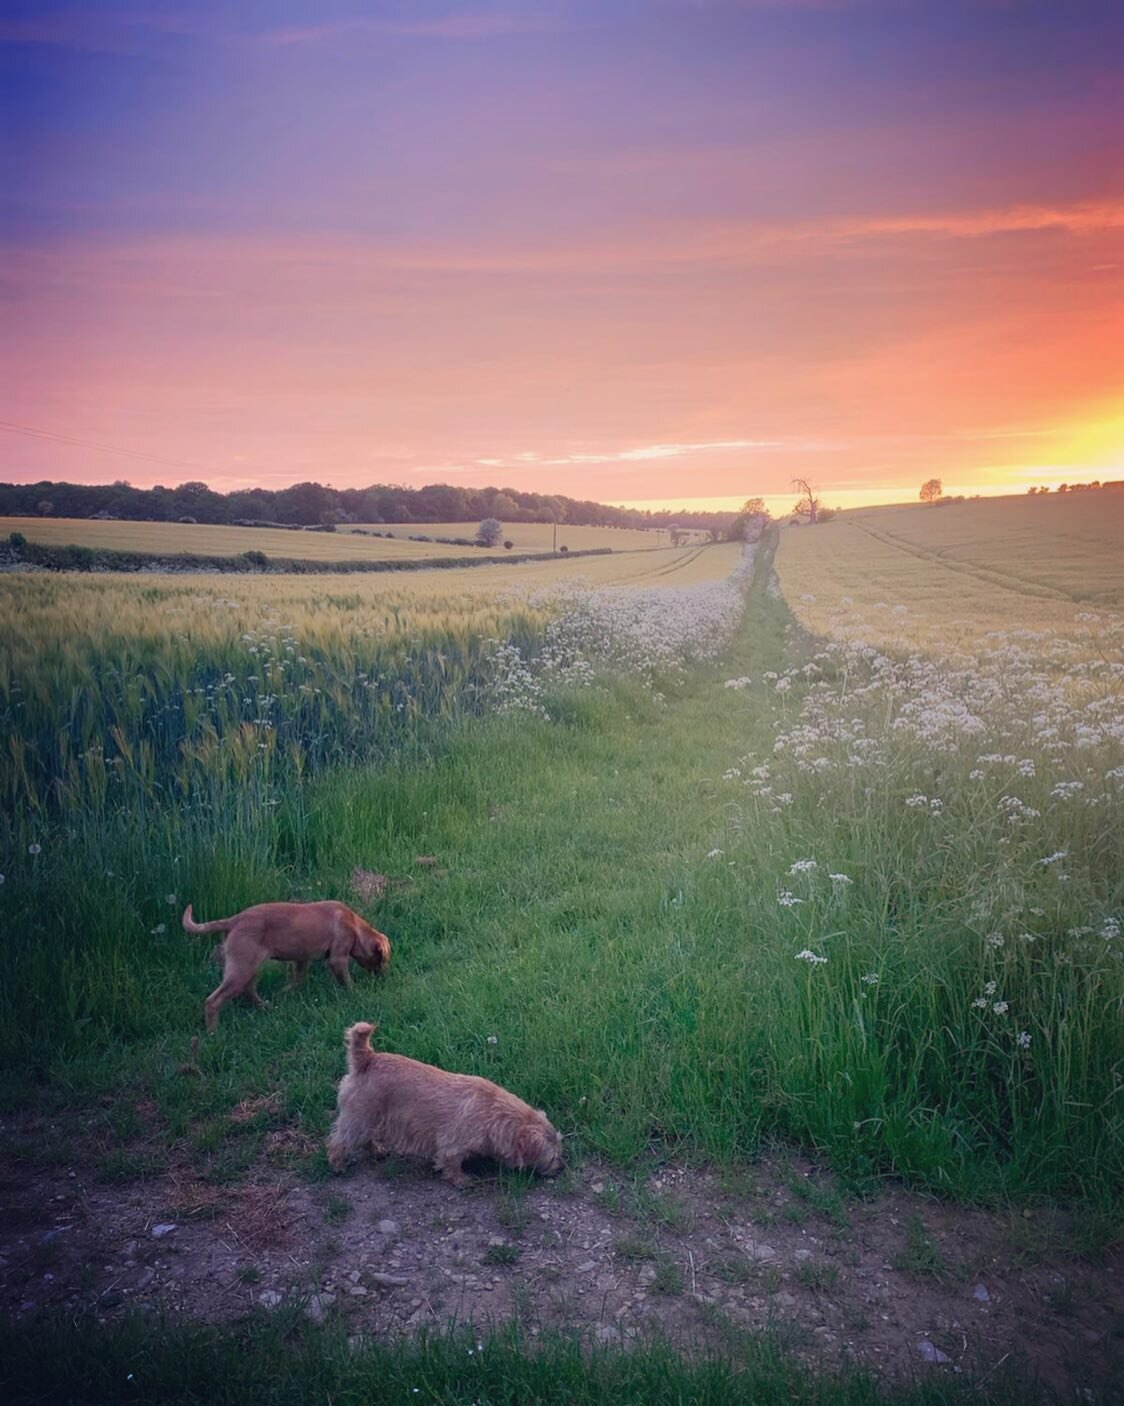 Just over a month to go until we welcome our 2021 Kozi students! 🤩

Very excited to be up and running again - the property is looking gorgeous at the moment and we have 2 new puppies on site! This picture taken from just outside the classroom 🔥

Th